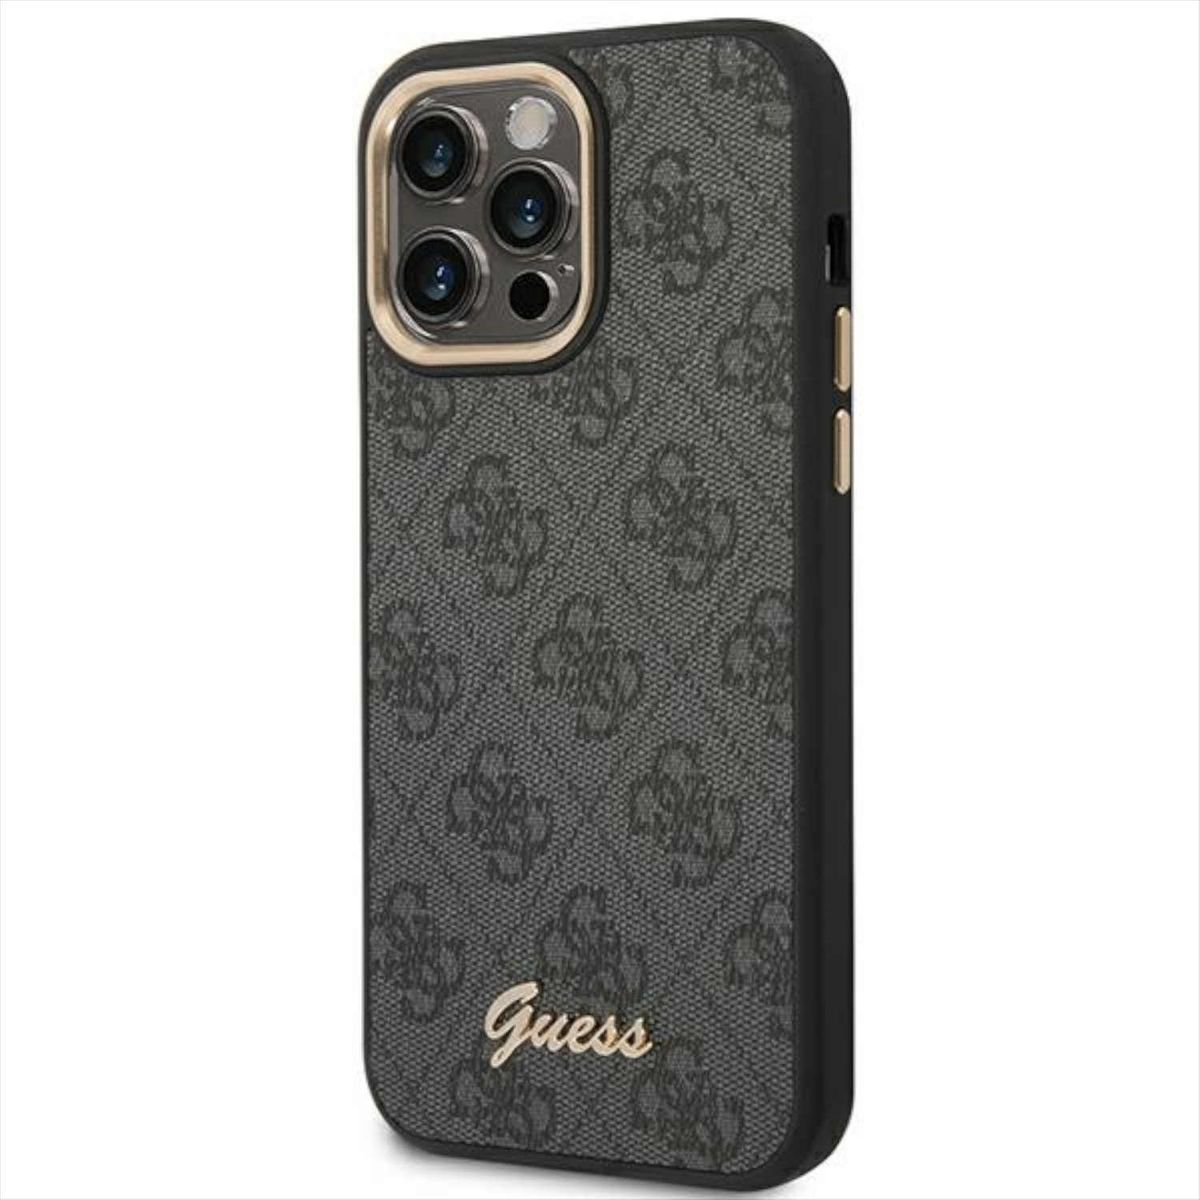 Pro 14 für - Multicolor iPhone Metal Outline Max, Guess Hülle Pro Apple, GUESS iPhone Case Full 14 Max Camera Cover, 4G (Schwarz),